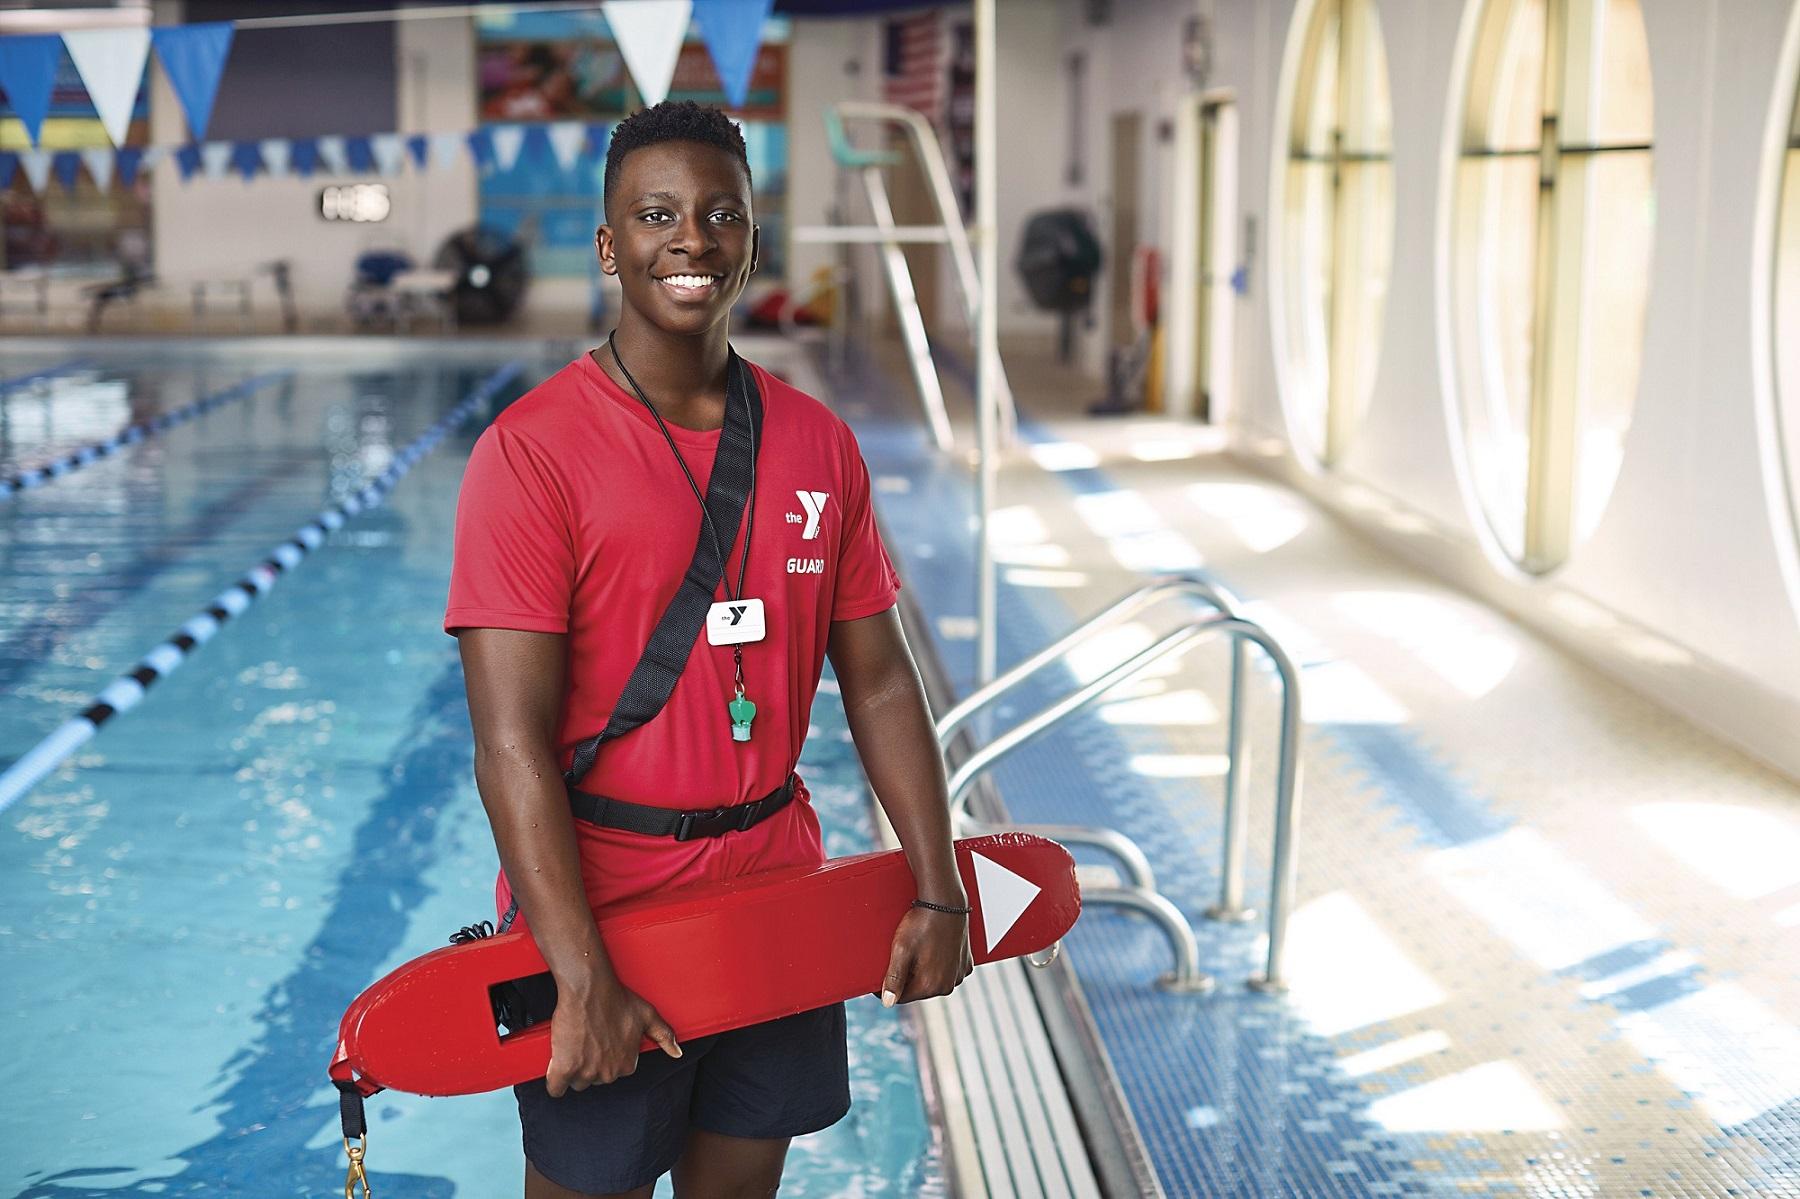 Male lifeguard in red shirt with swim tube